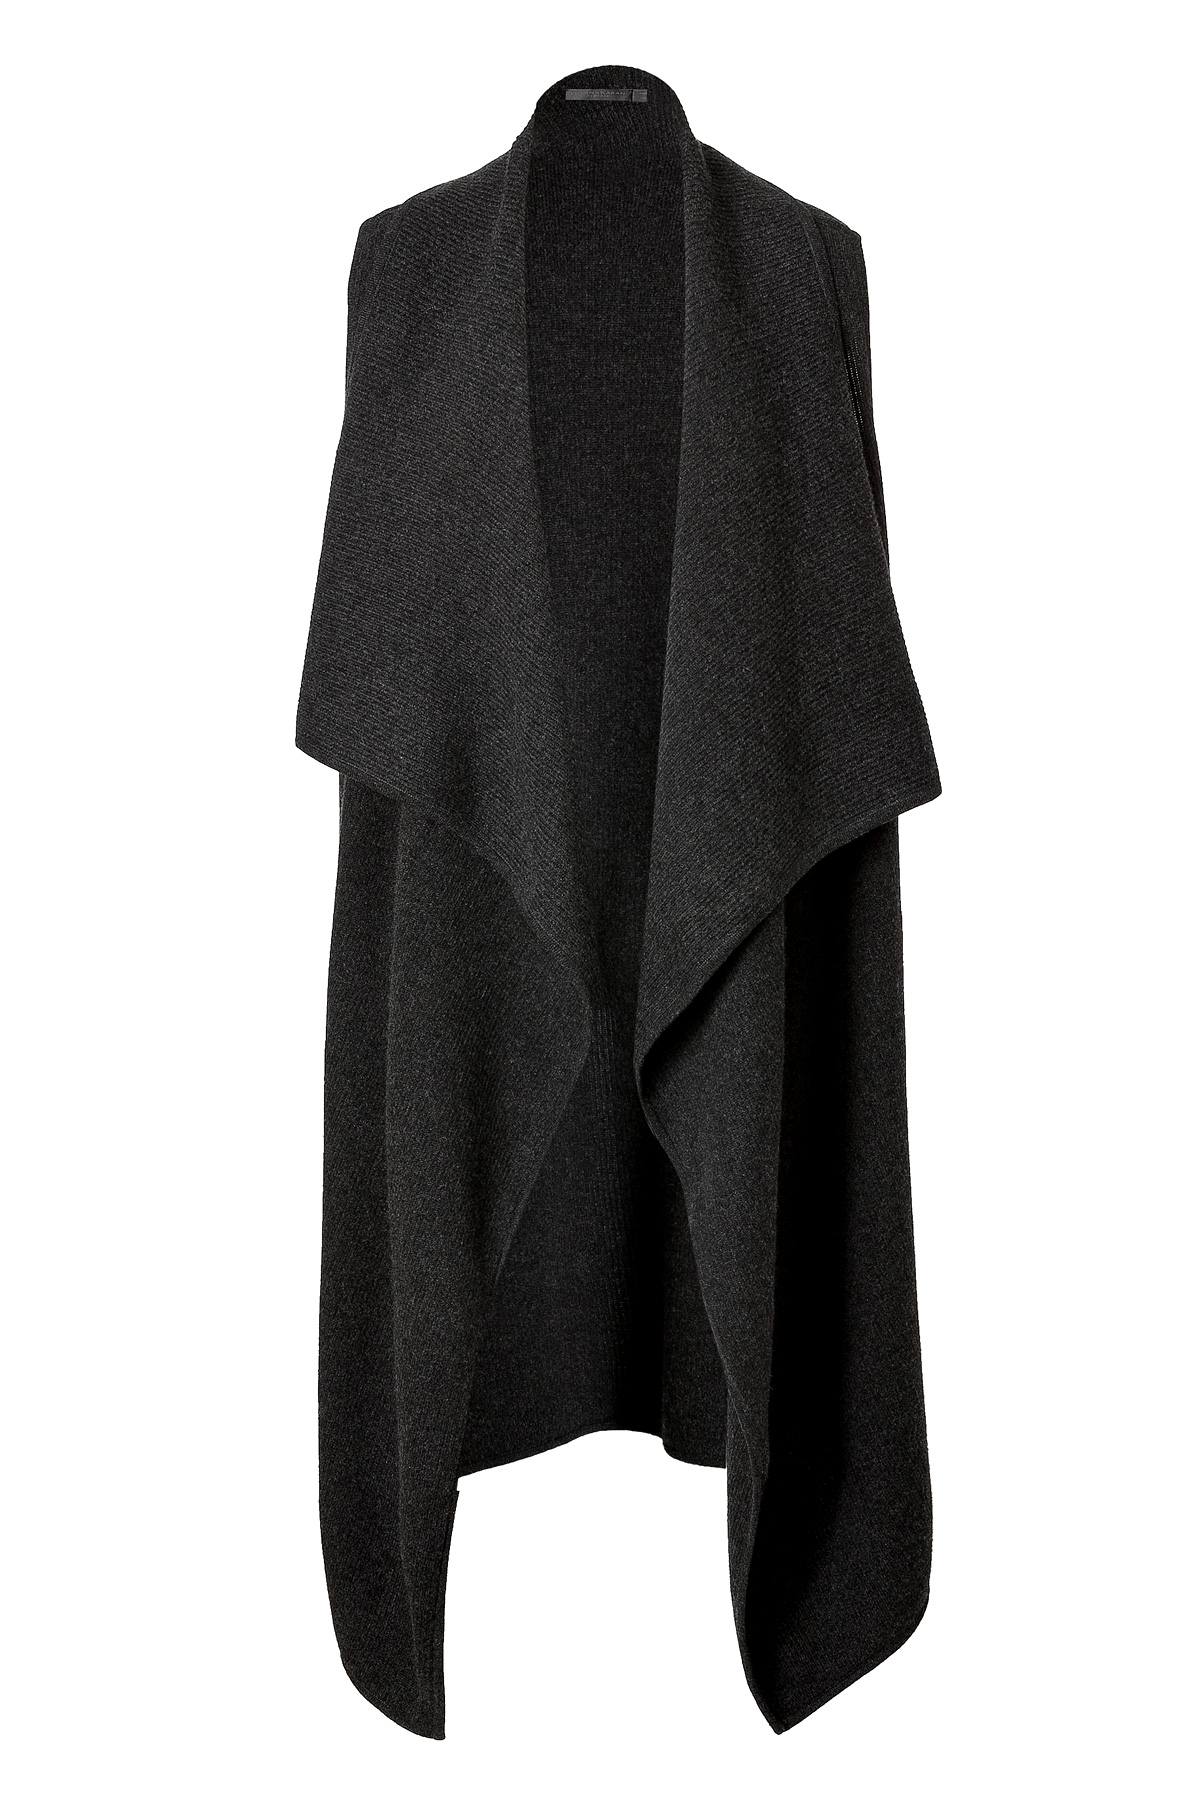 Donna karan new york Cashmere Cape In Charco - Grey in Black | Lyst